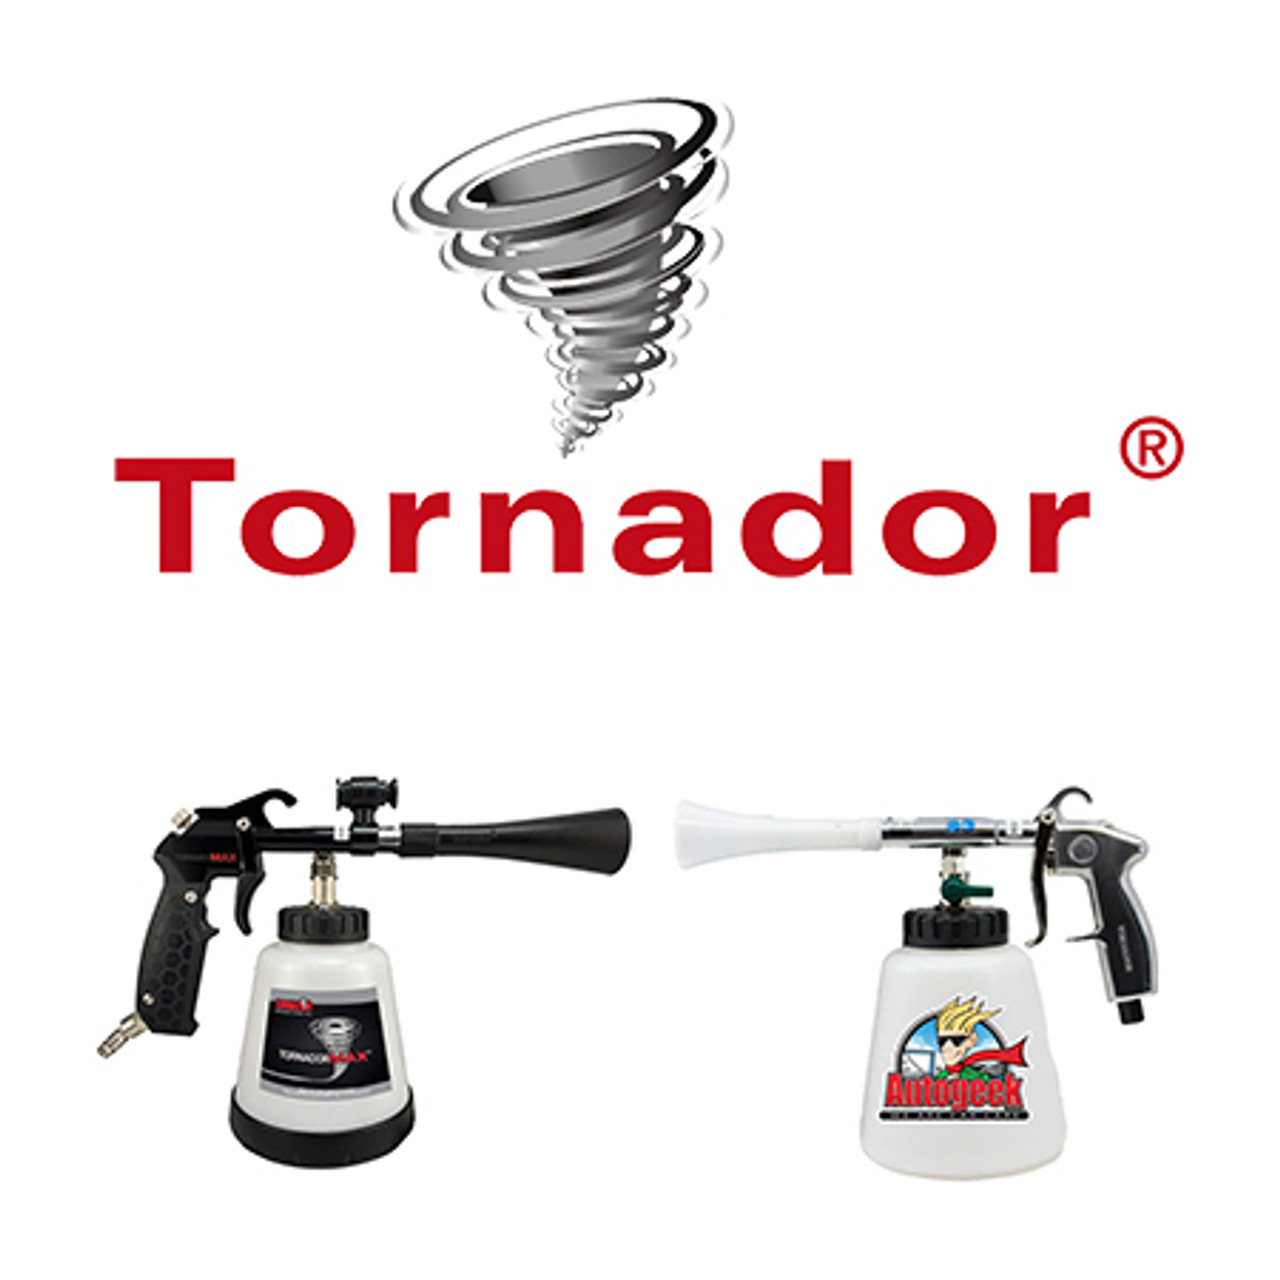 TORNADOR CLEANING TOOL. Professional Detailing Products, Because